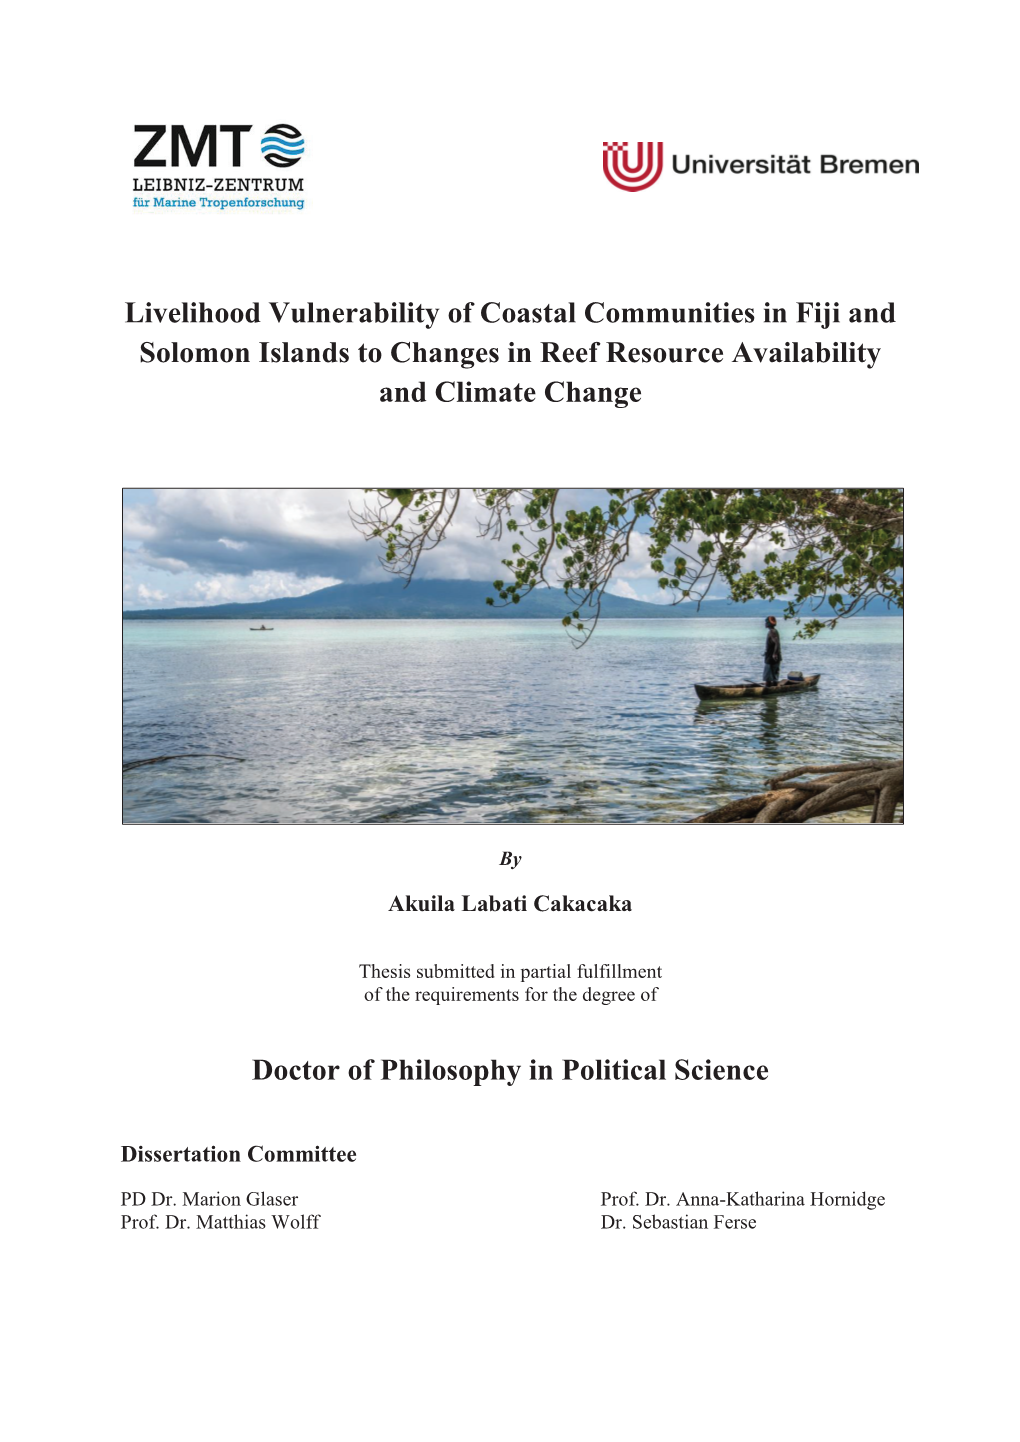 Livelihood Vulnerability of Coastal Communities in Fiji and Solomon Islands to Changes in Reef Resource Availability and Climate Change